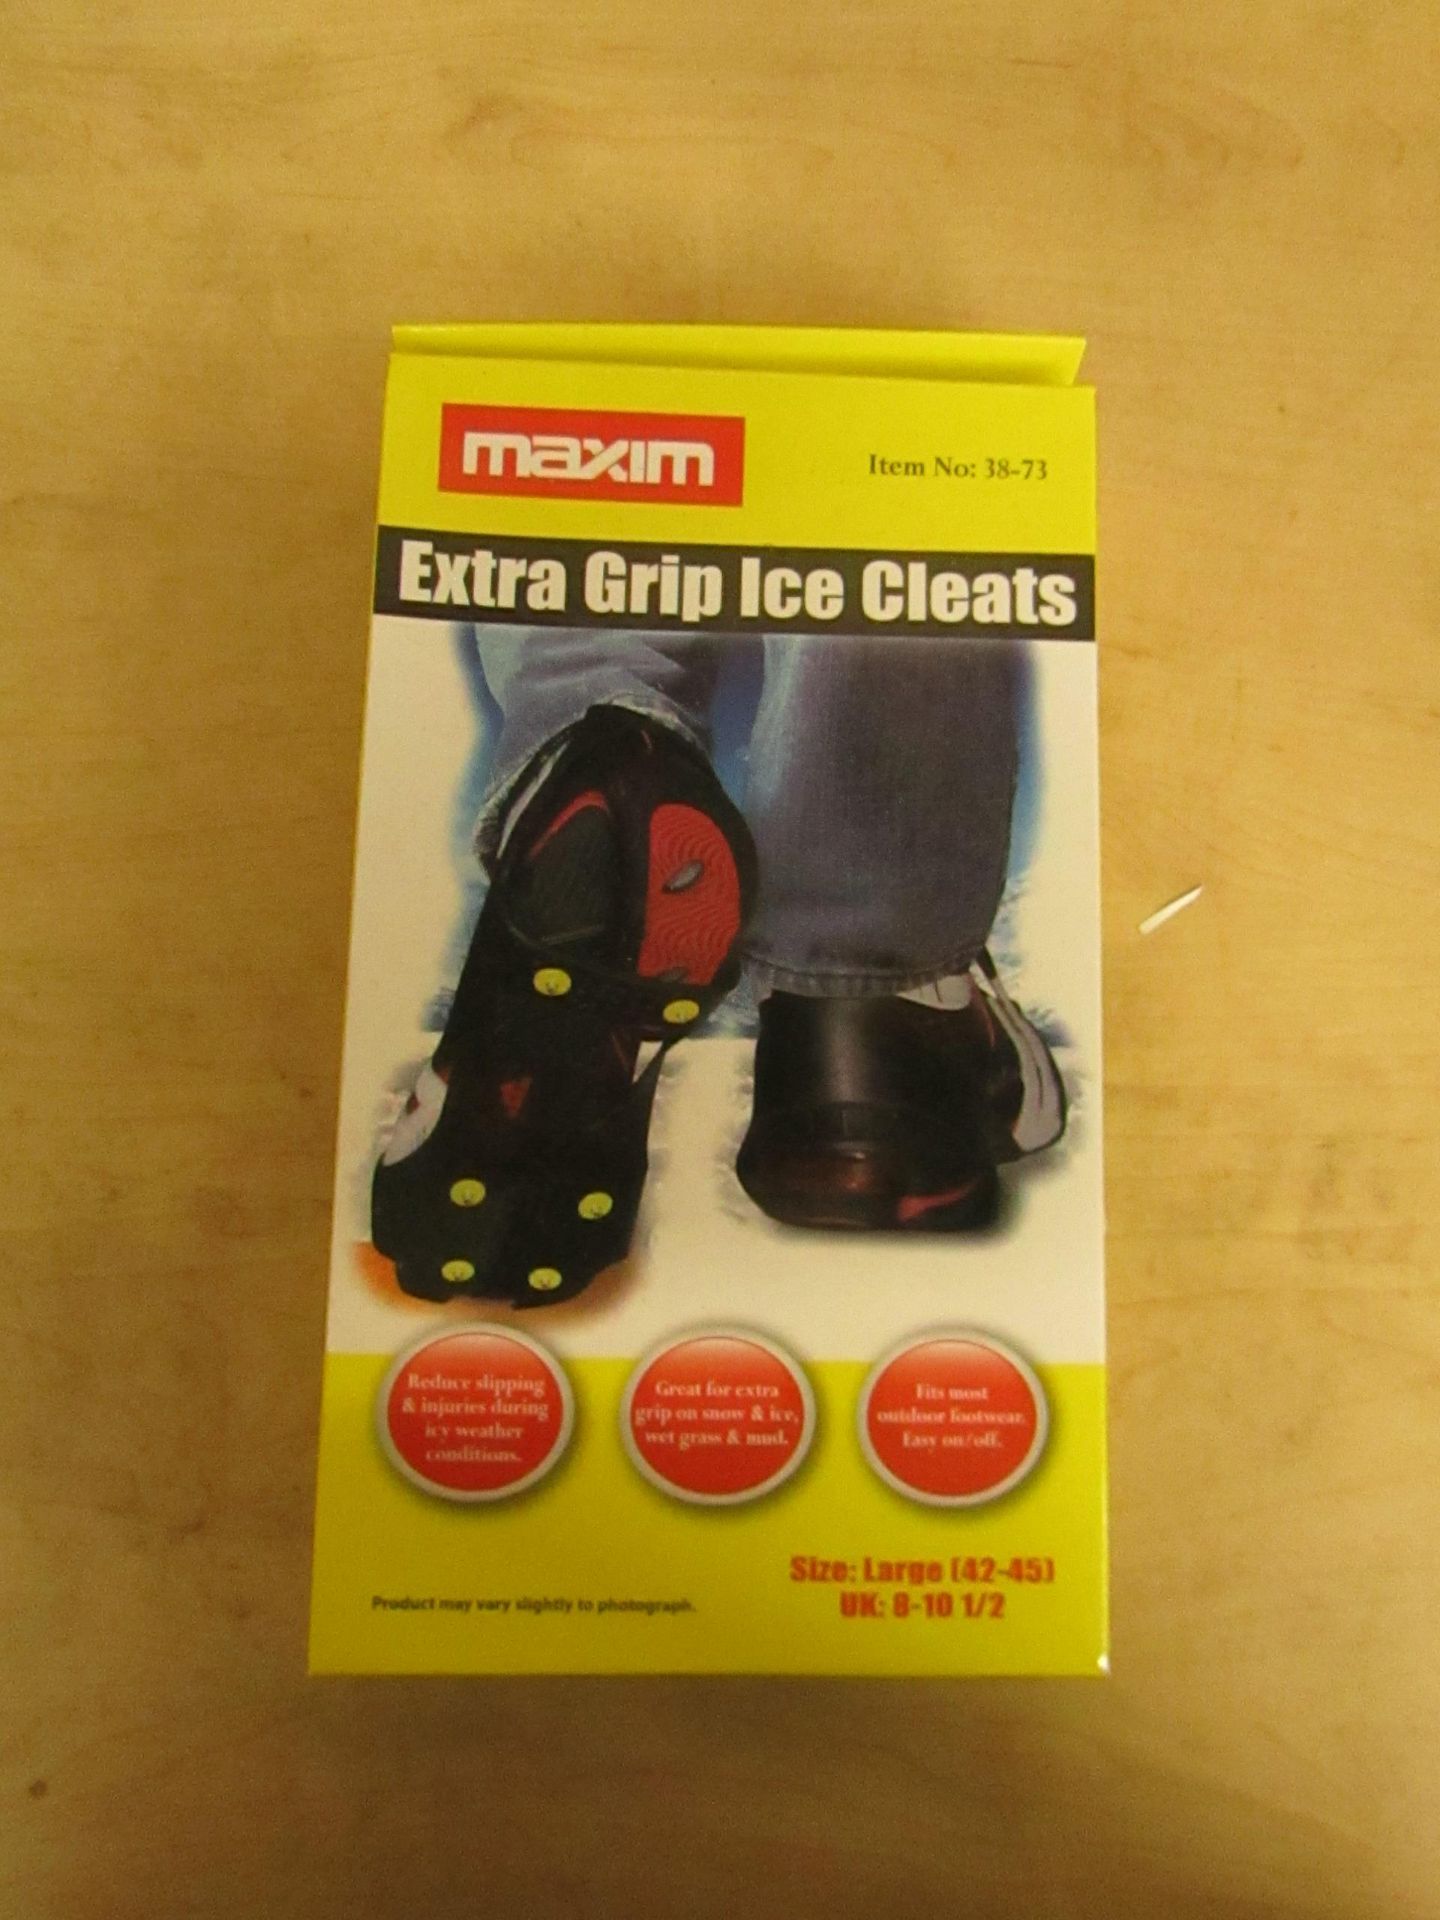 6 x Sets Maxim Ice grips Cleats,  new (packaging may be a little crushed)